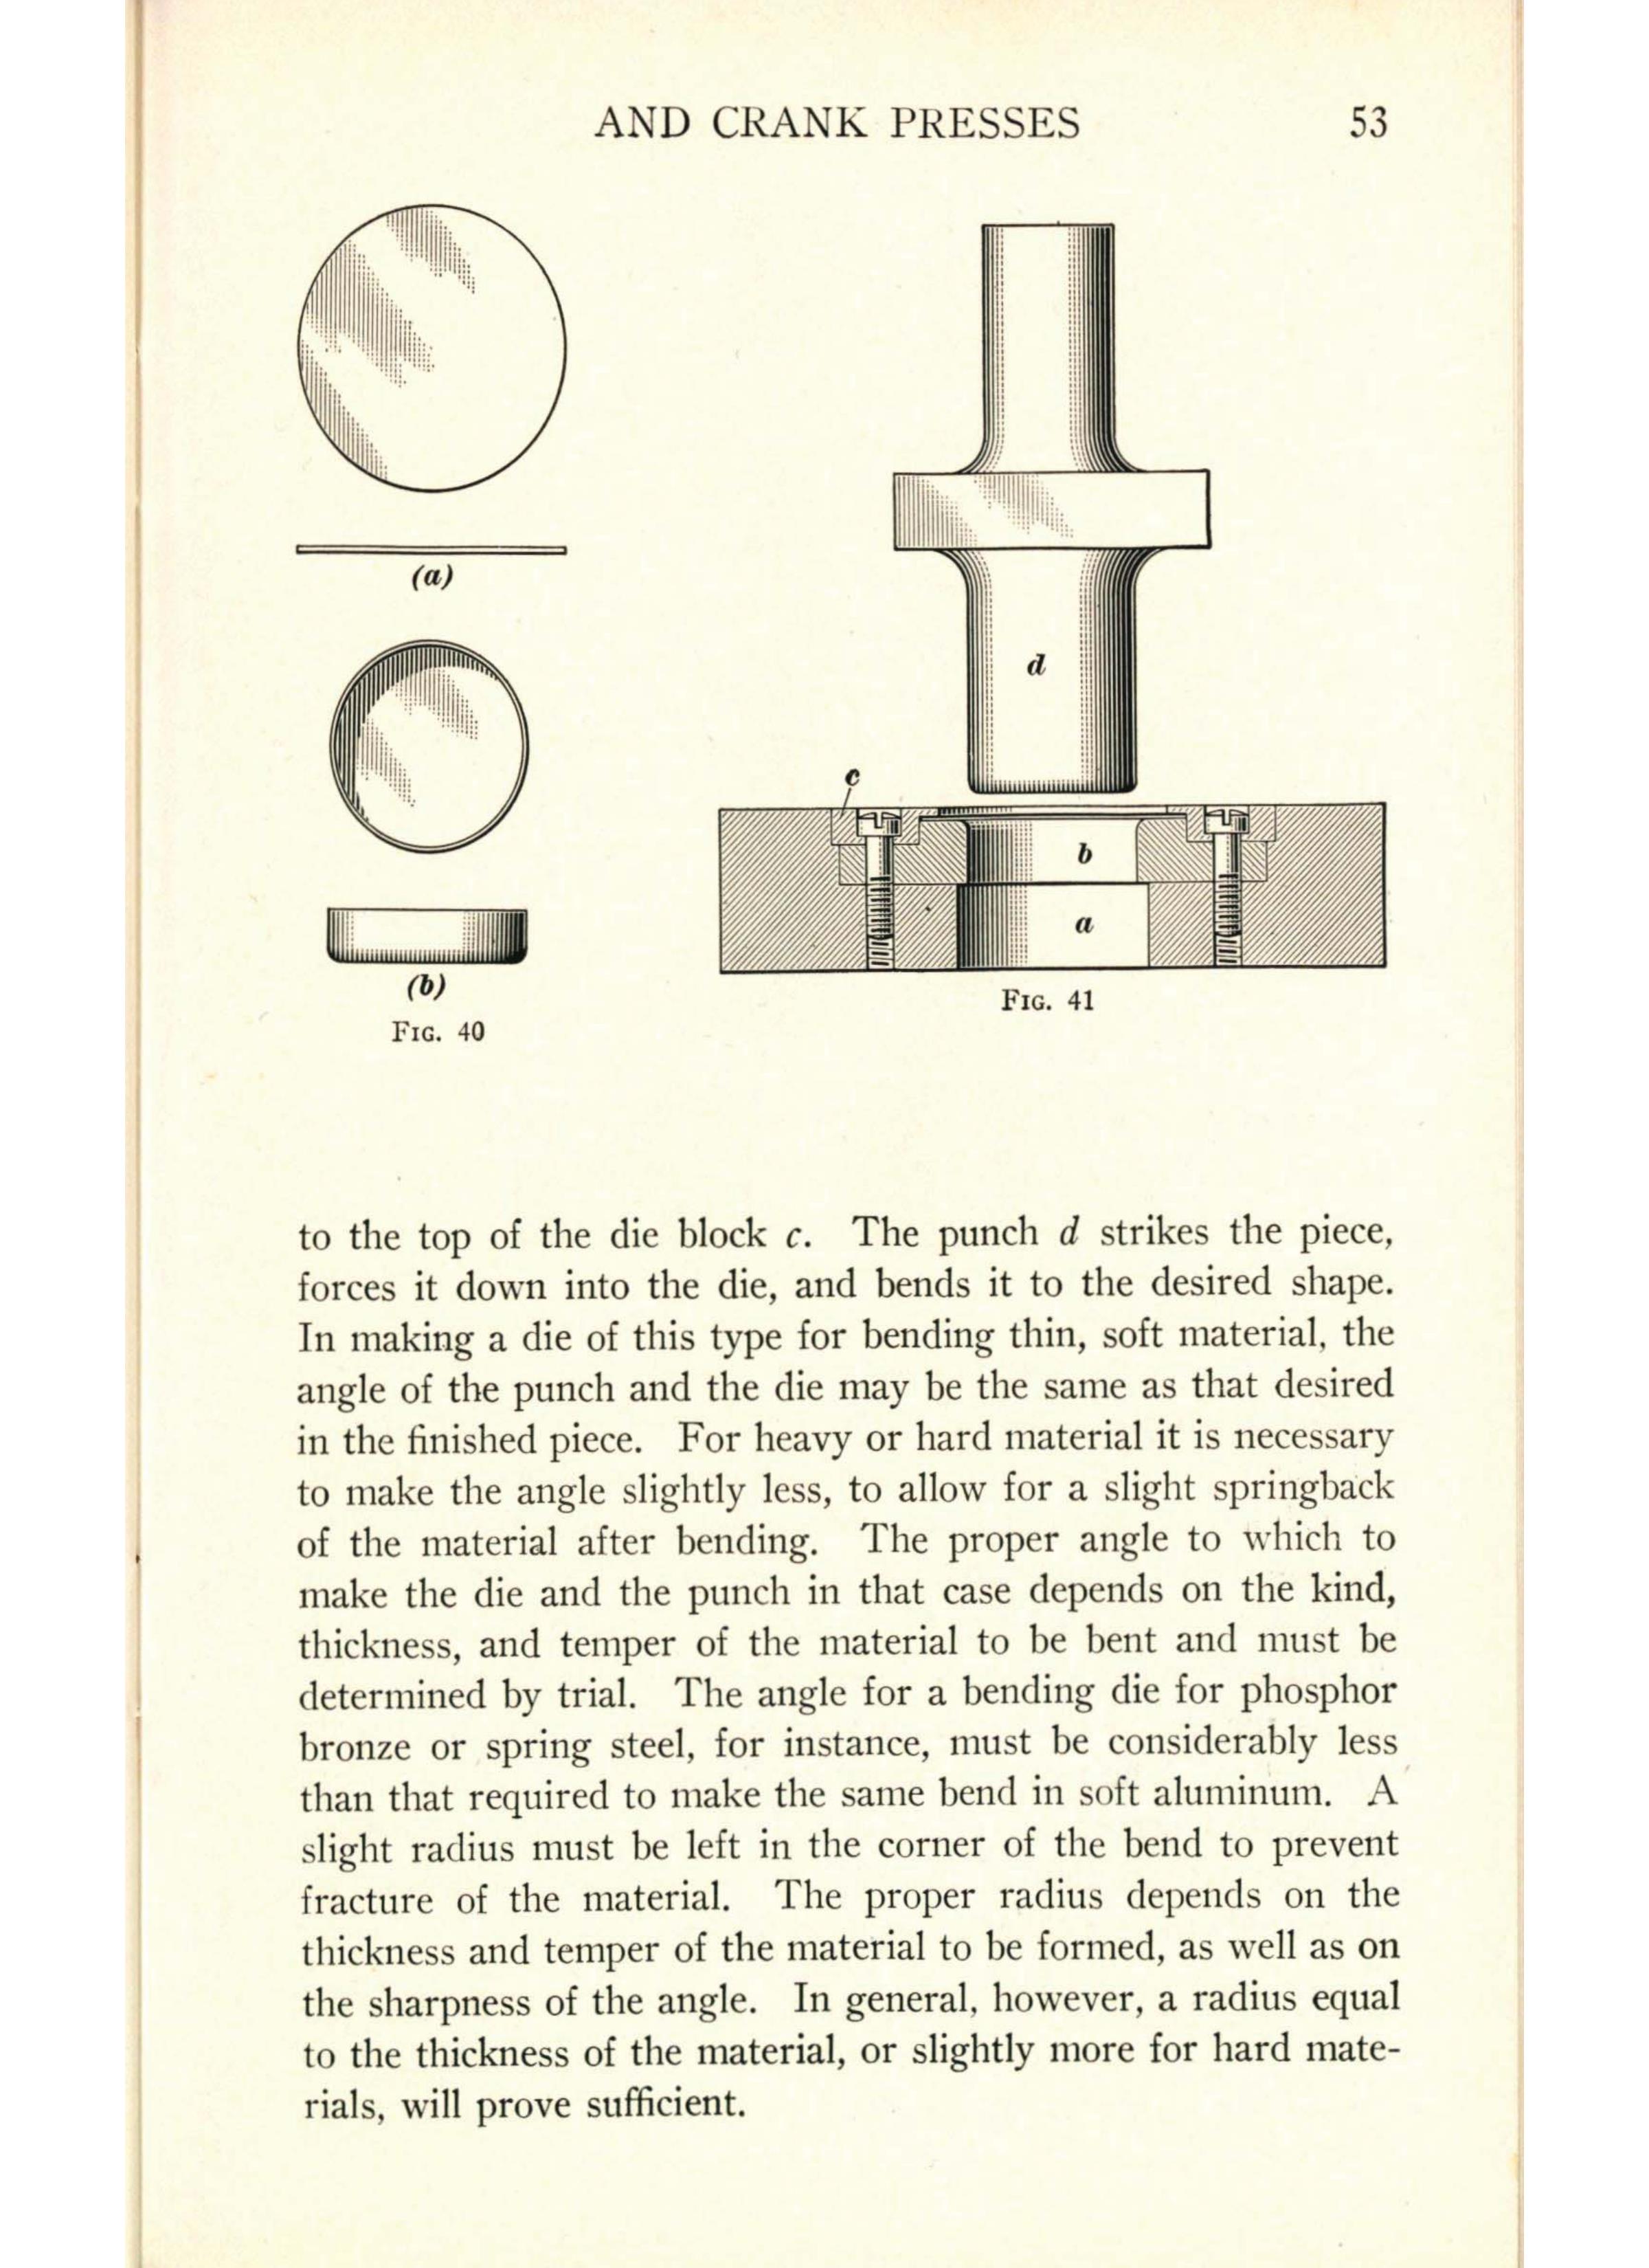 Sample page 55 from AirCorps Library document: Forming Methods - Hydraulic & Crank Presses - Bureau of Aeronautics